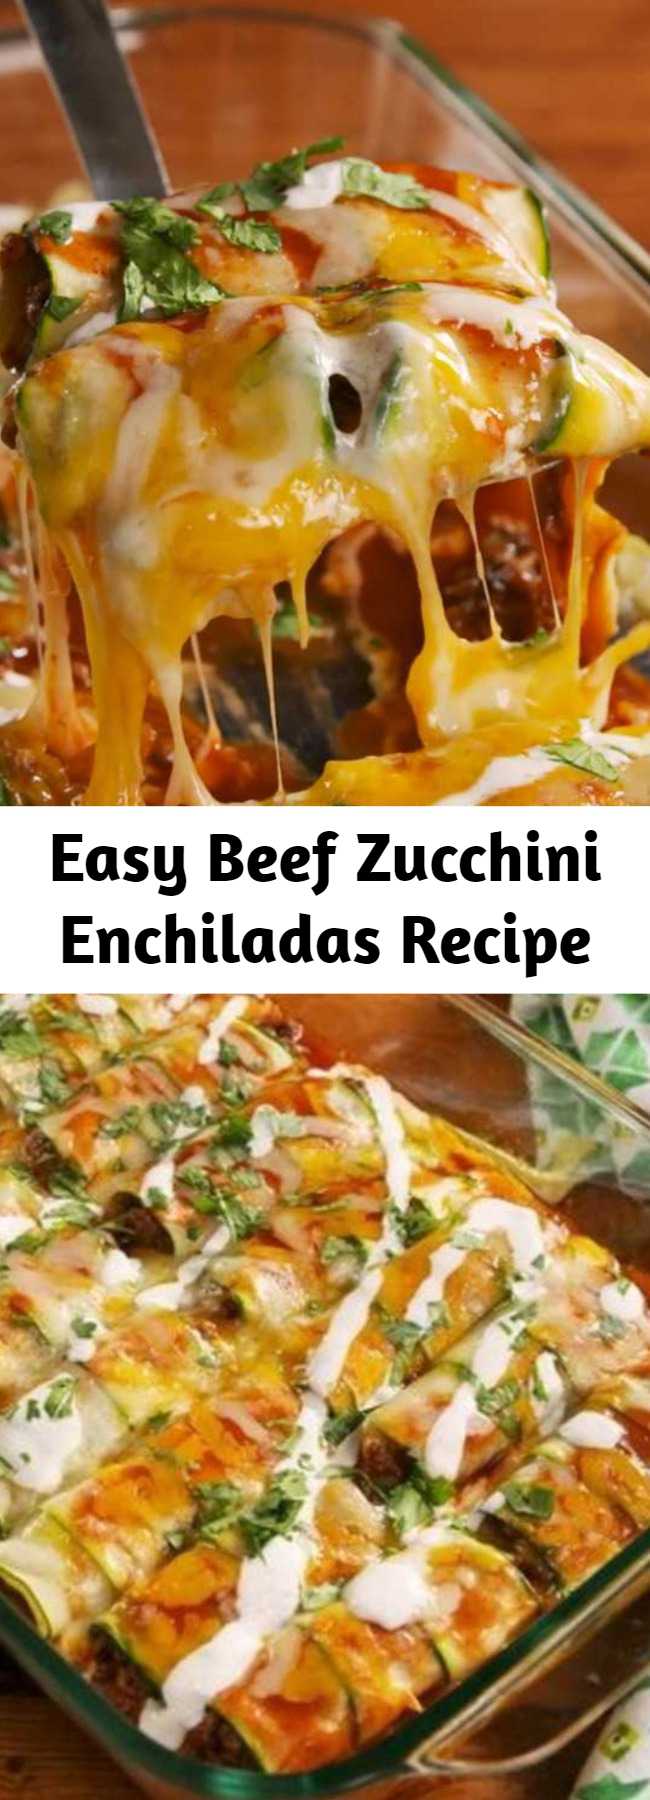 Easy Beef Zucchini Enchiladas Recipe - Zucchini can do it all and these enchiladas prove it! It's much easier to roll up than you would imaging making these so fun to make. #lowcarb #zucchini #healthyenchiladas #healthyrecipes